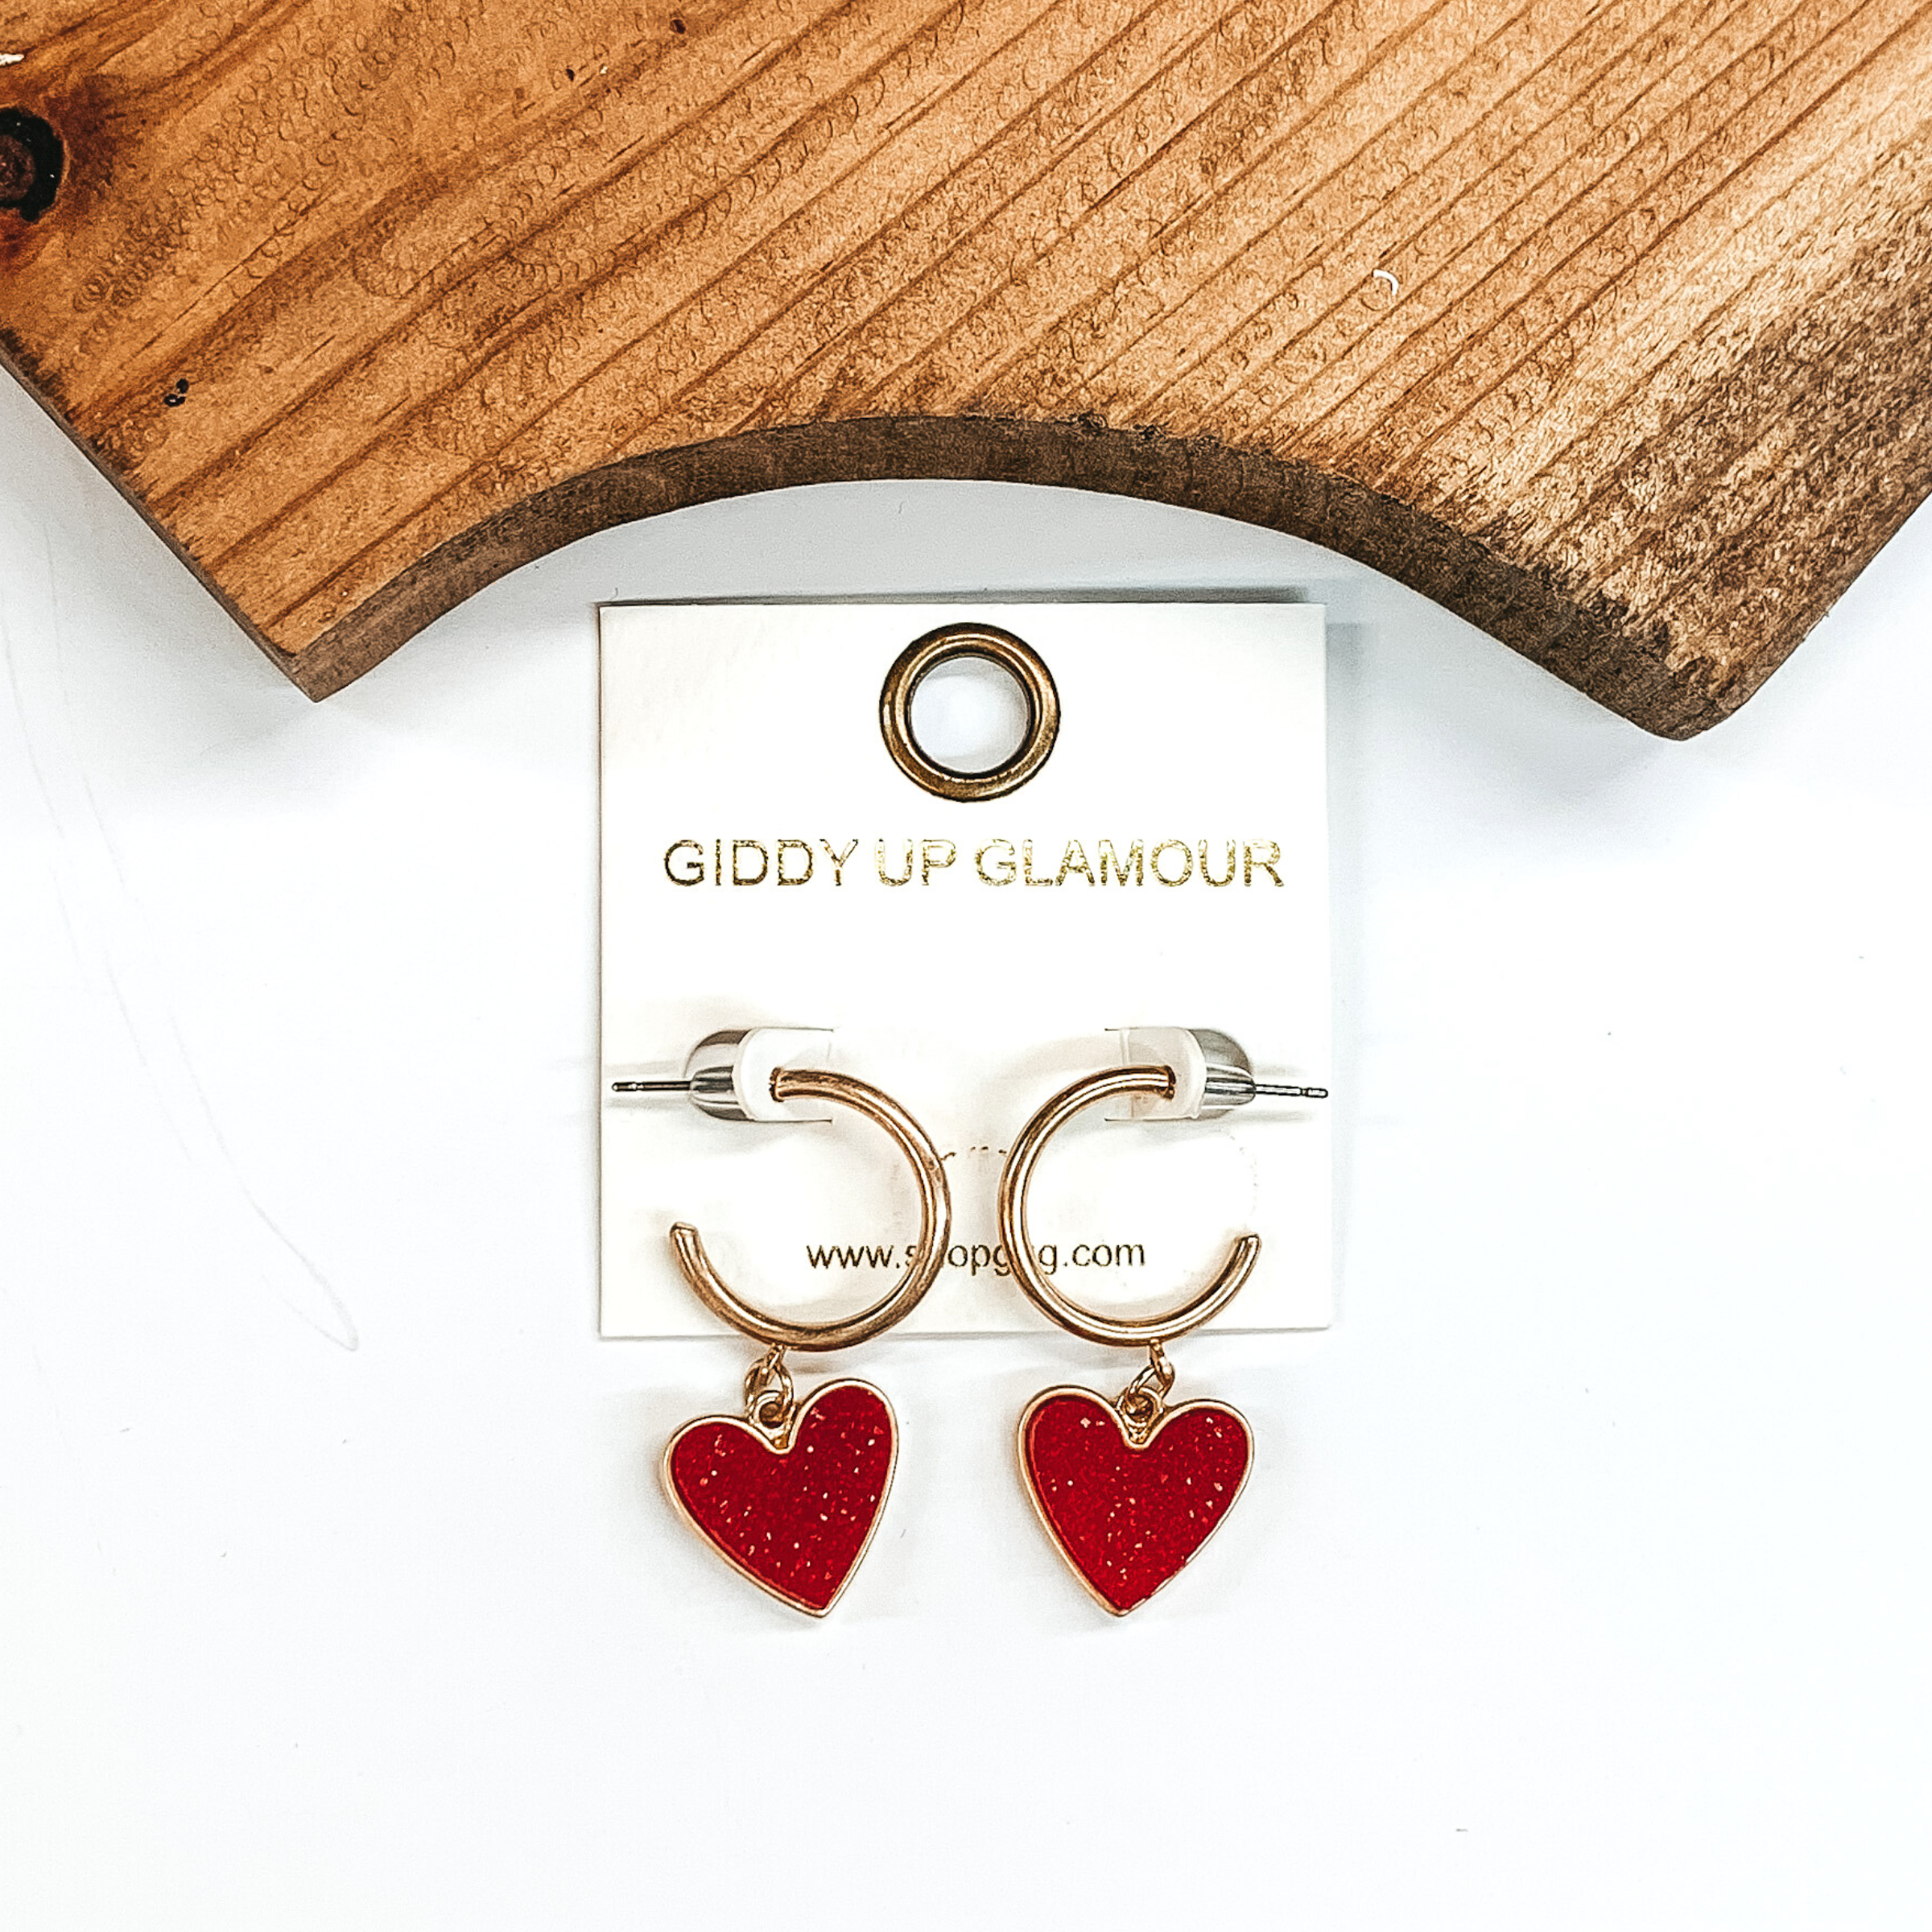 Gold hoop earrings with a maroon druzy heart charm at the bottom of the hoop. These earring are pictured on a white background with a piece of wood pictured at the top of the picture.